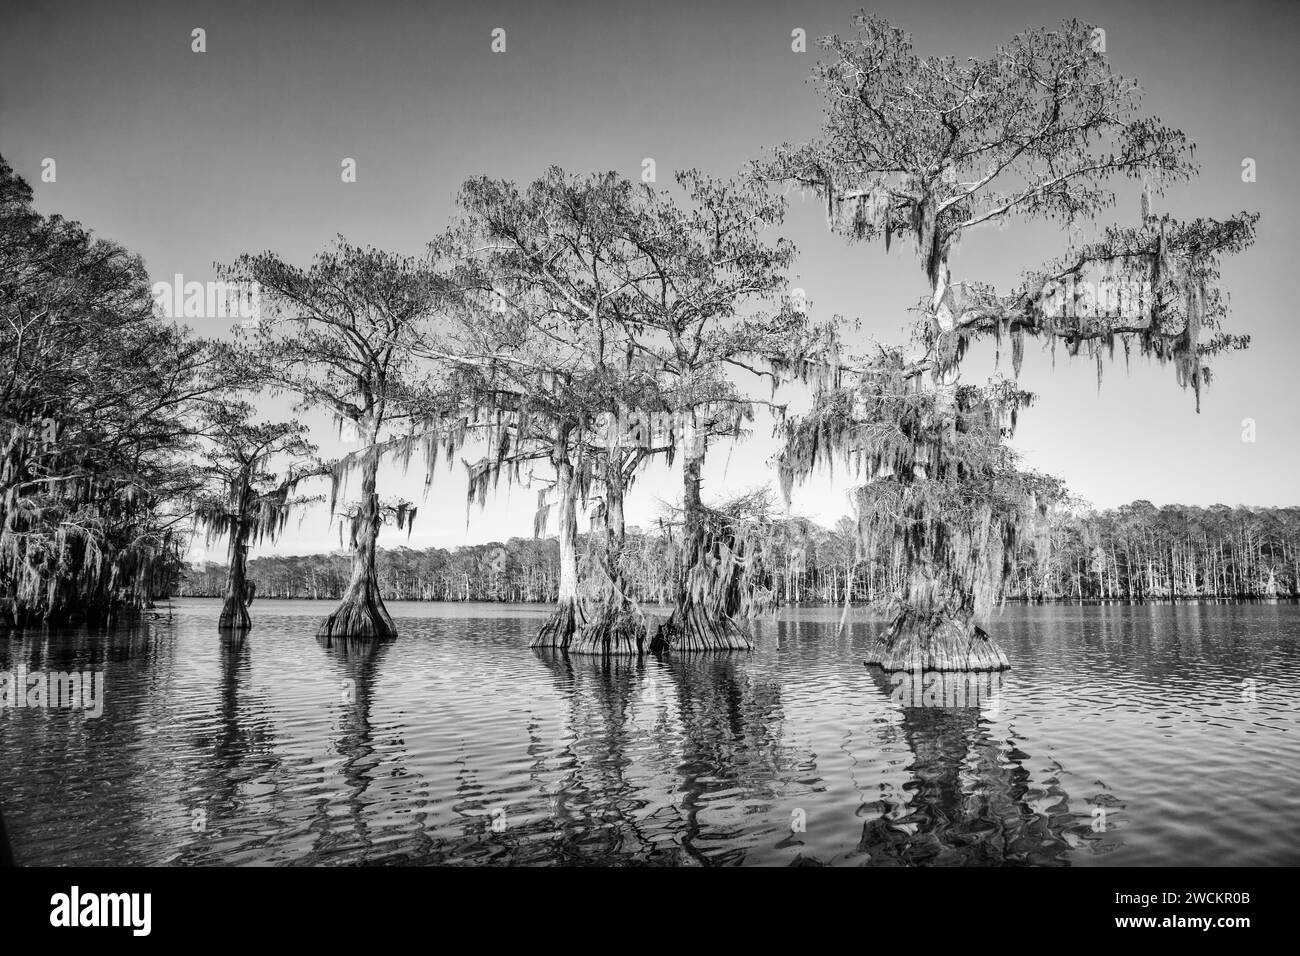 Old-growth bald cypress trees in Lake Dauterive draped with Spanish moss in the Atchafalaya Basin or Swamp in Louisiana. Stock Photo